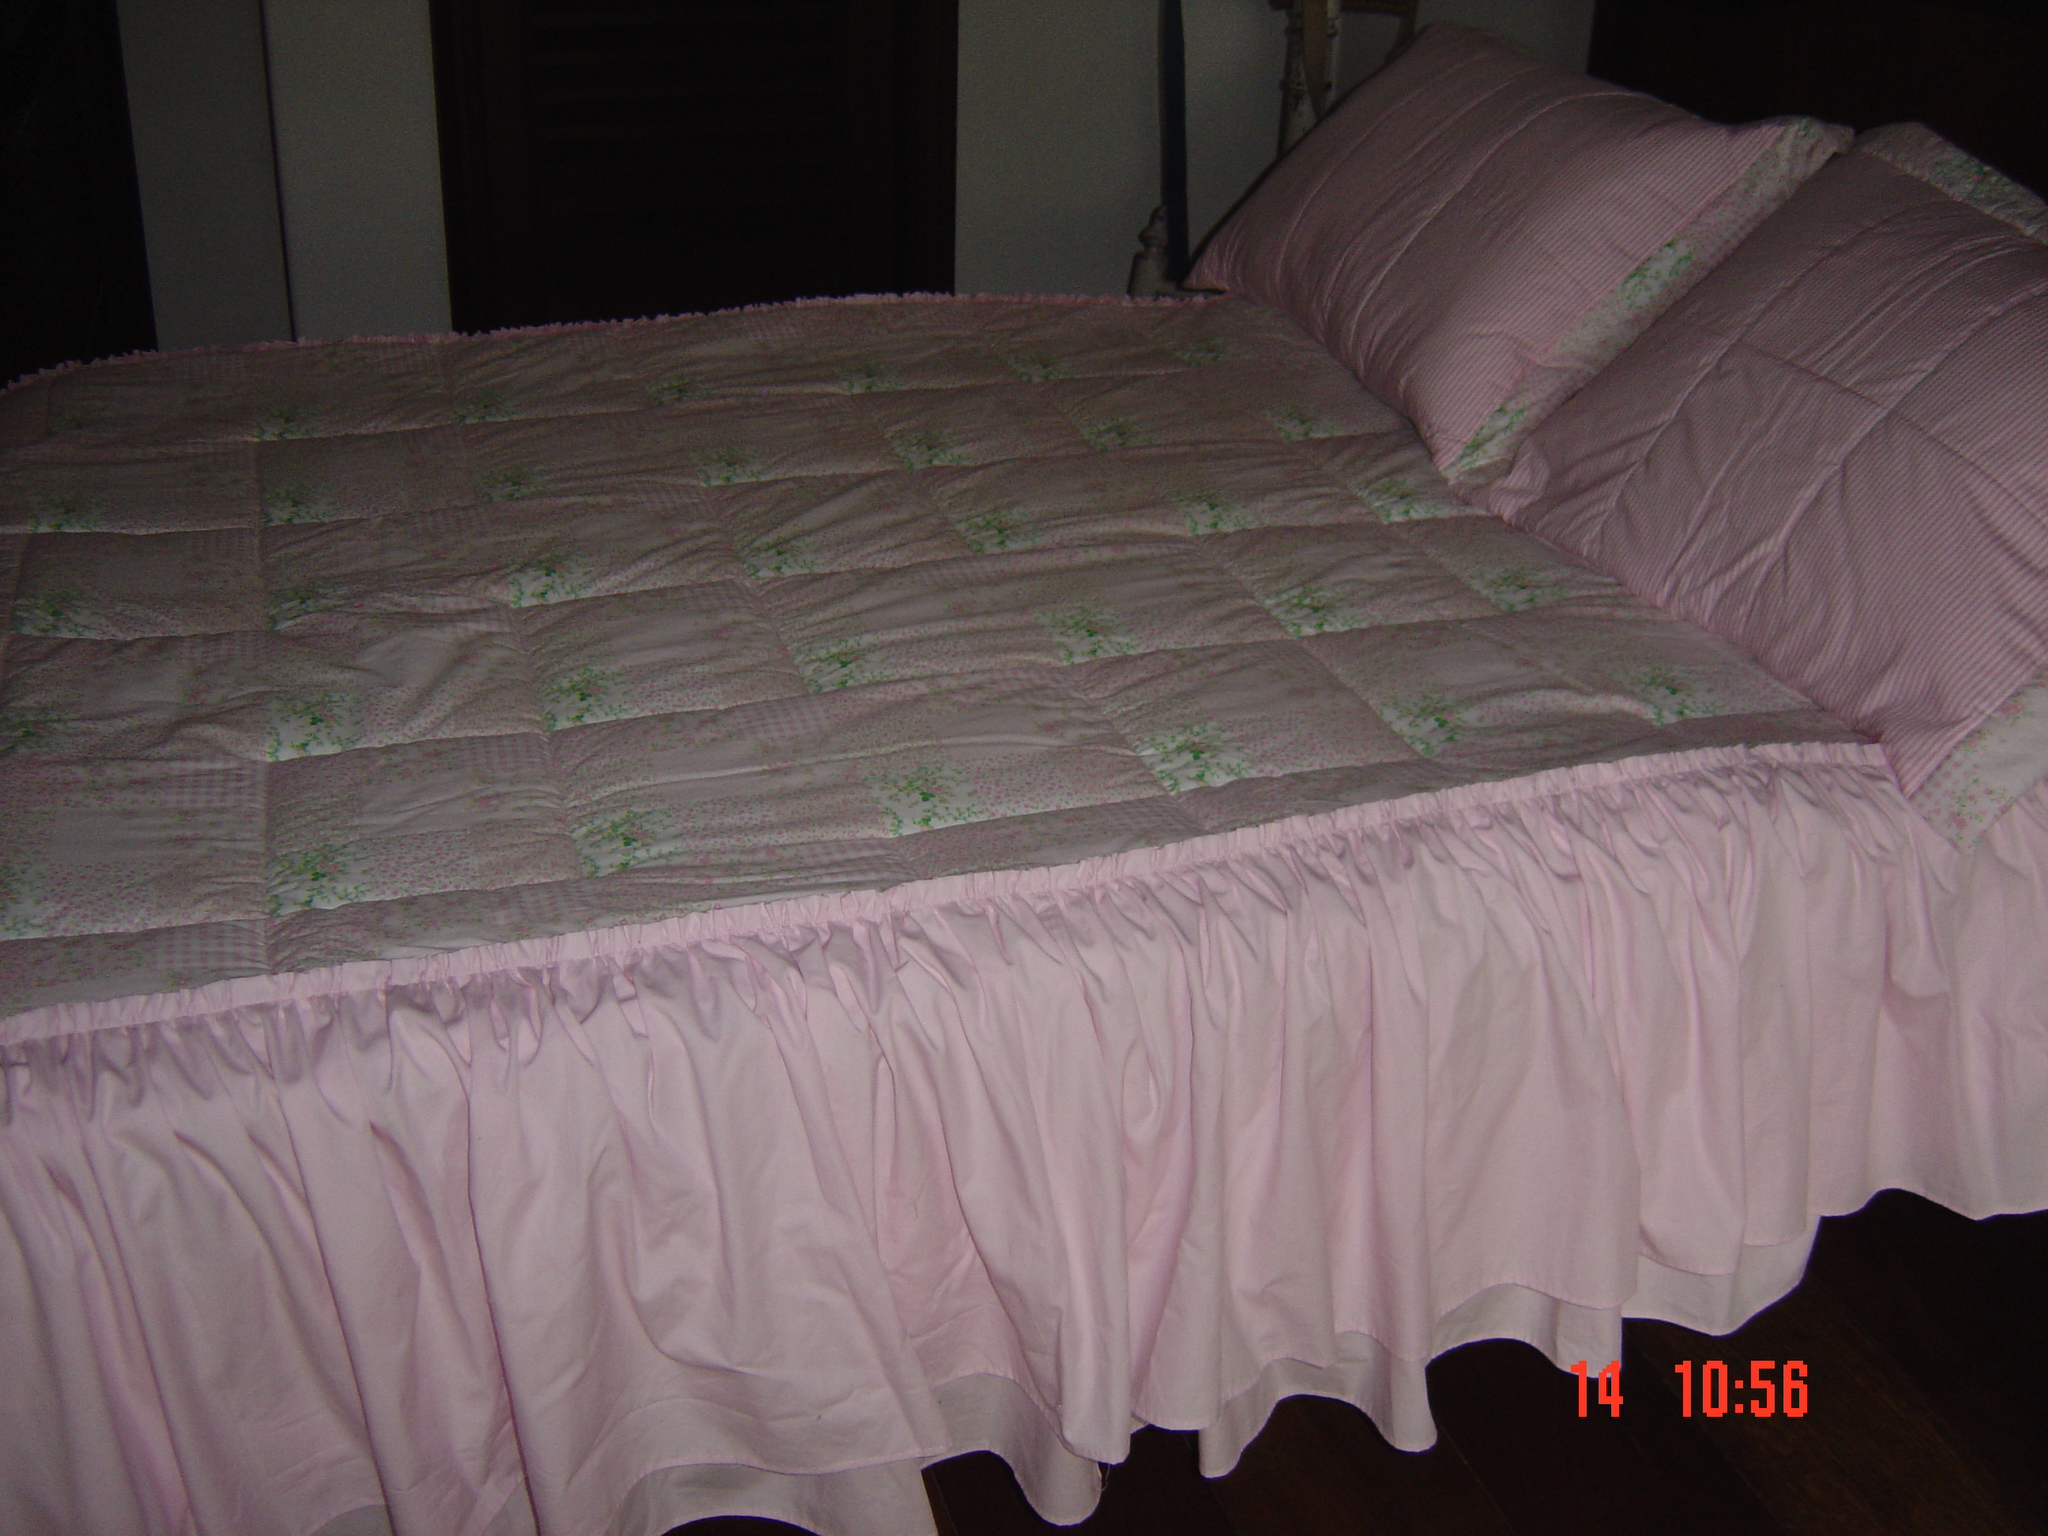 a close up of a neatly made bed in a room